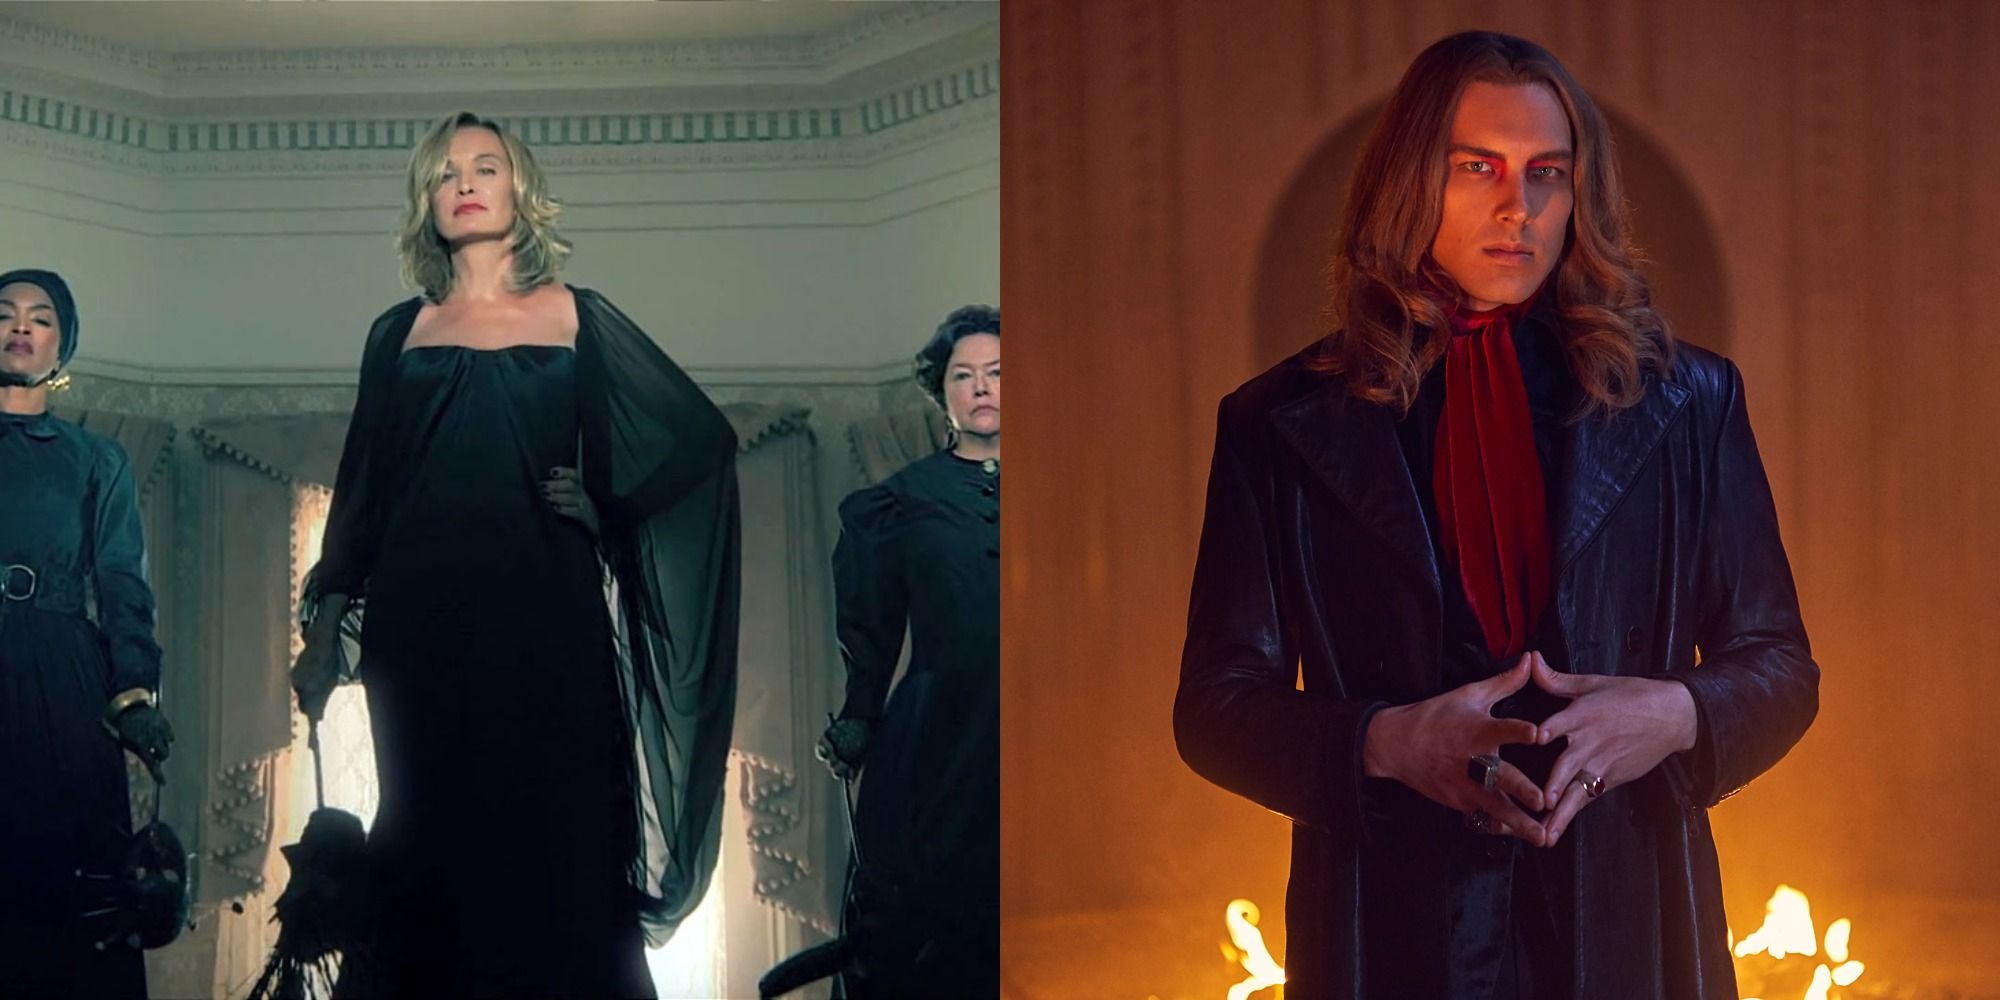 Split image showing Marie Laveau, Fiona Goode, and Madame Lalaurie in American Horror Story: Coven, and Michael Langdon in AHS: Apocalypse